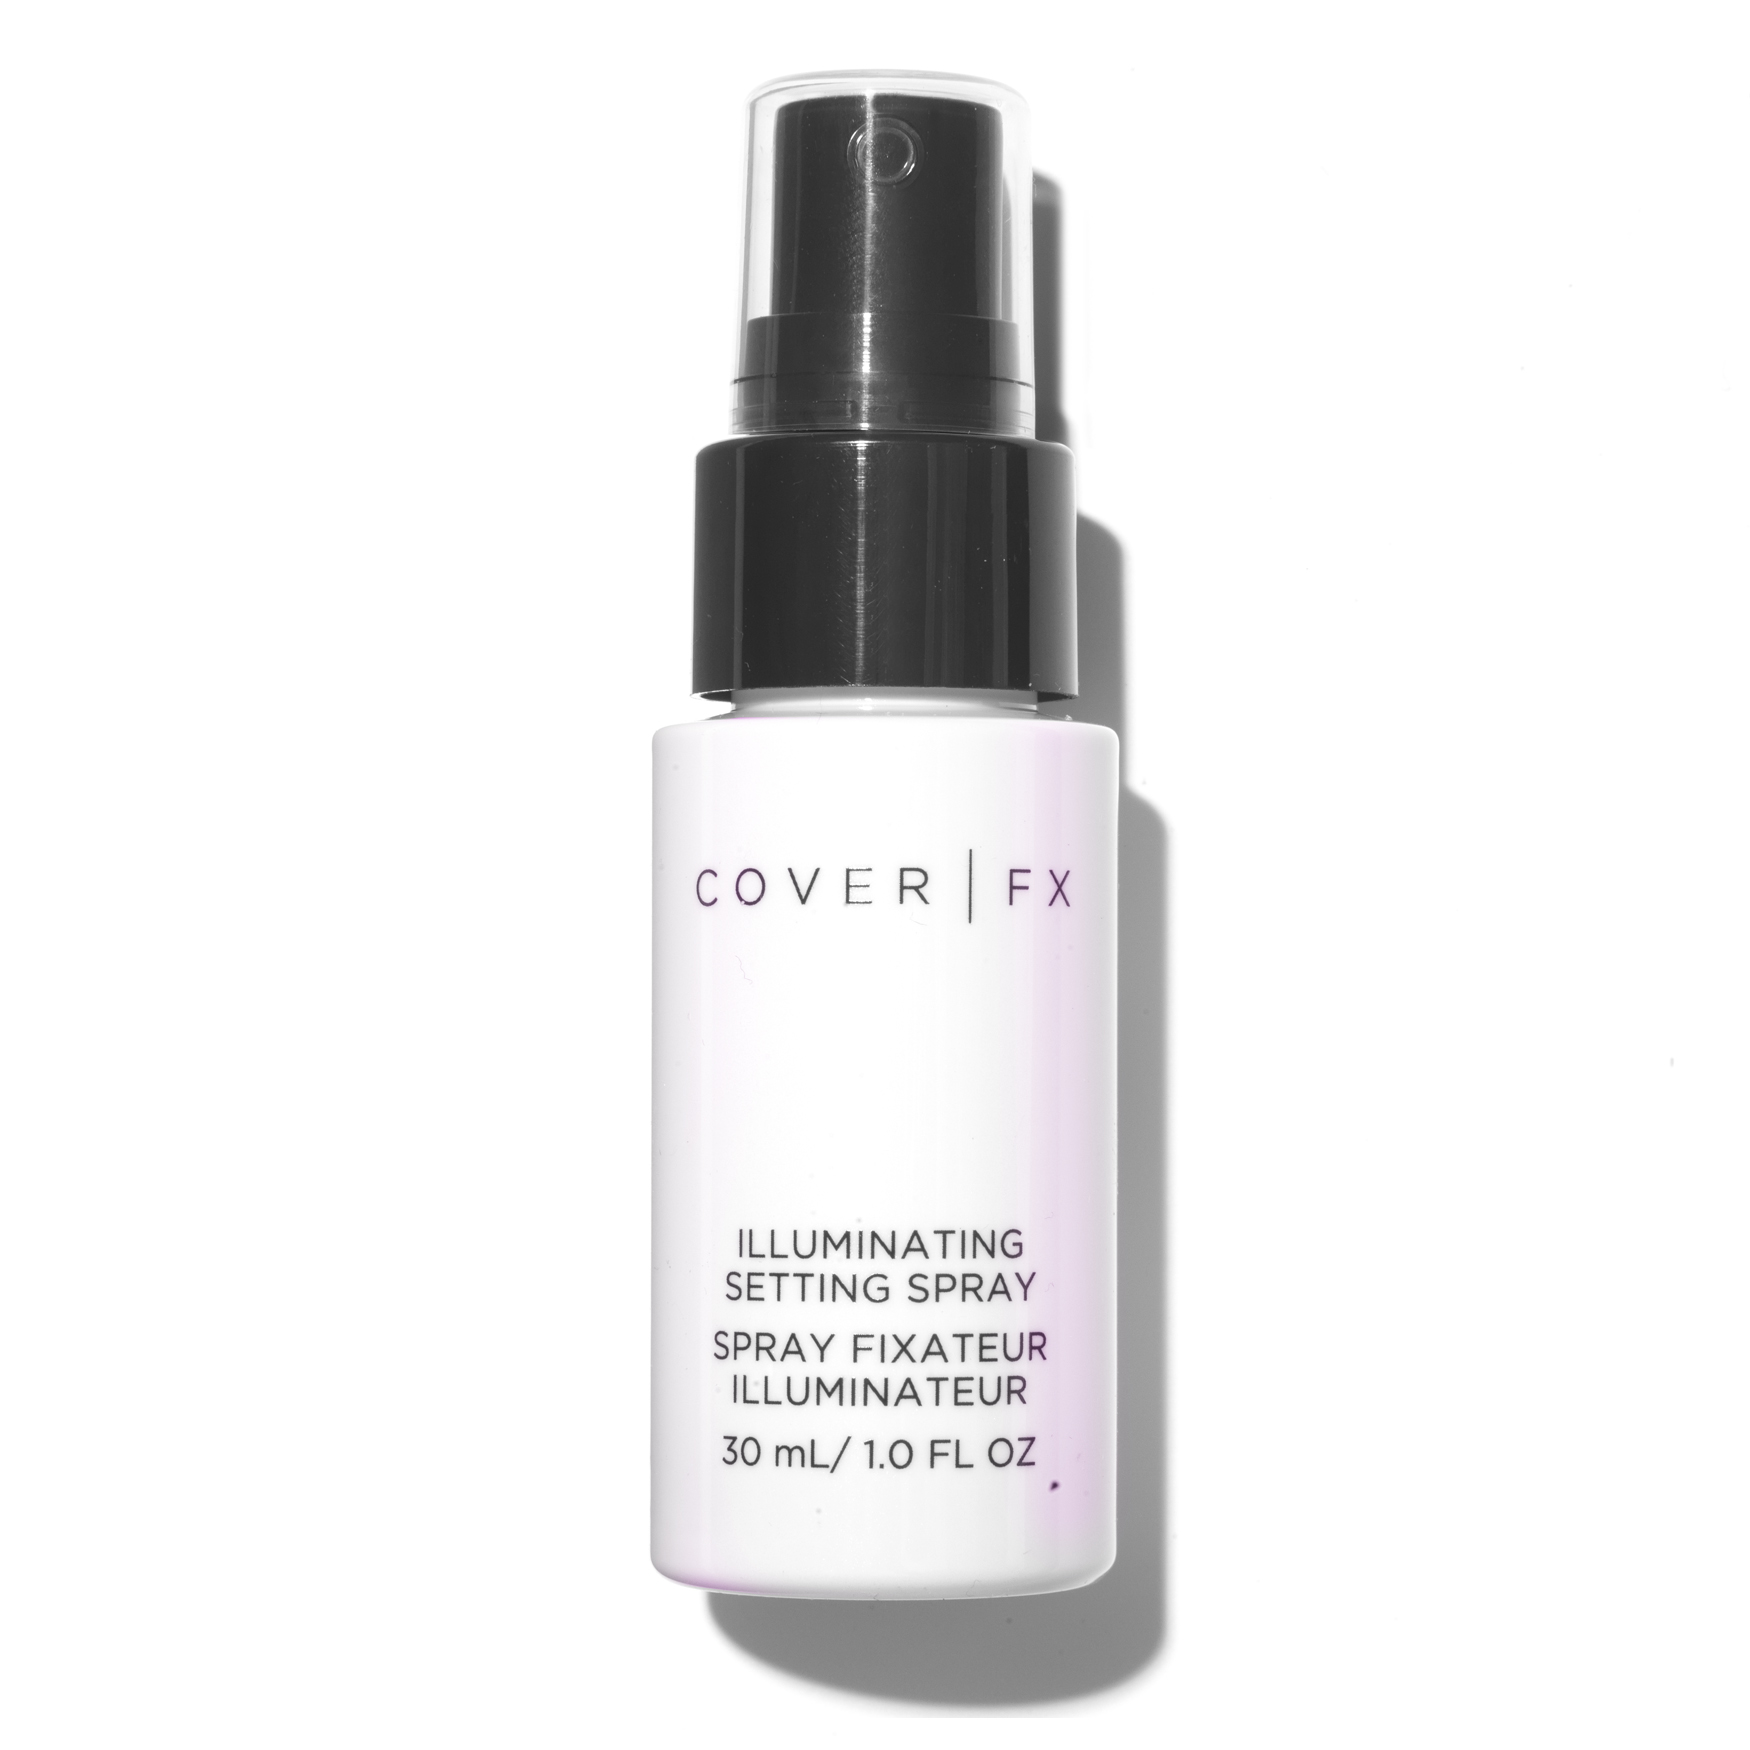 Cover Fx Illuminating Setting Spray Travel Size | Space NK